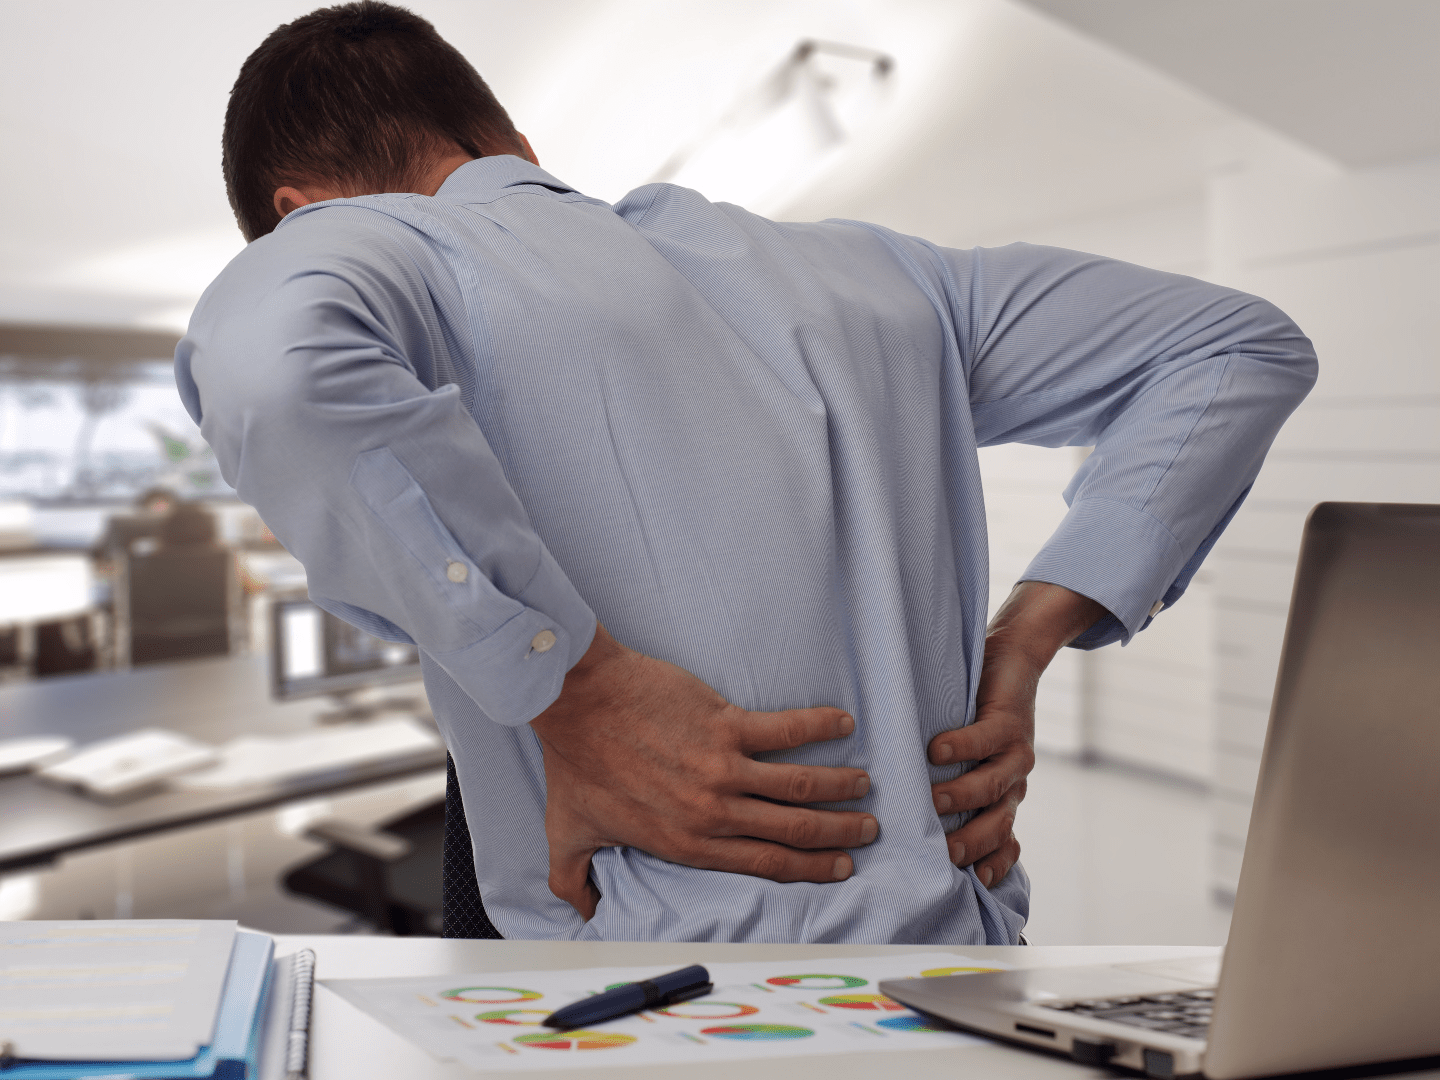 How to treat low back pain